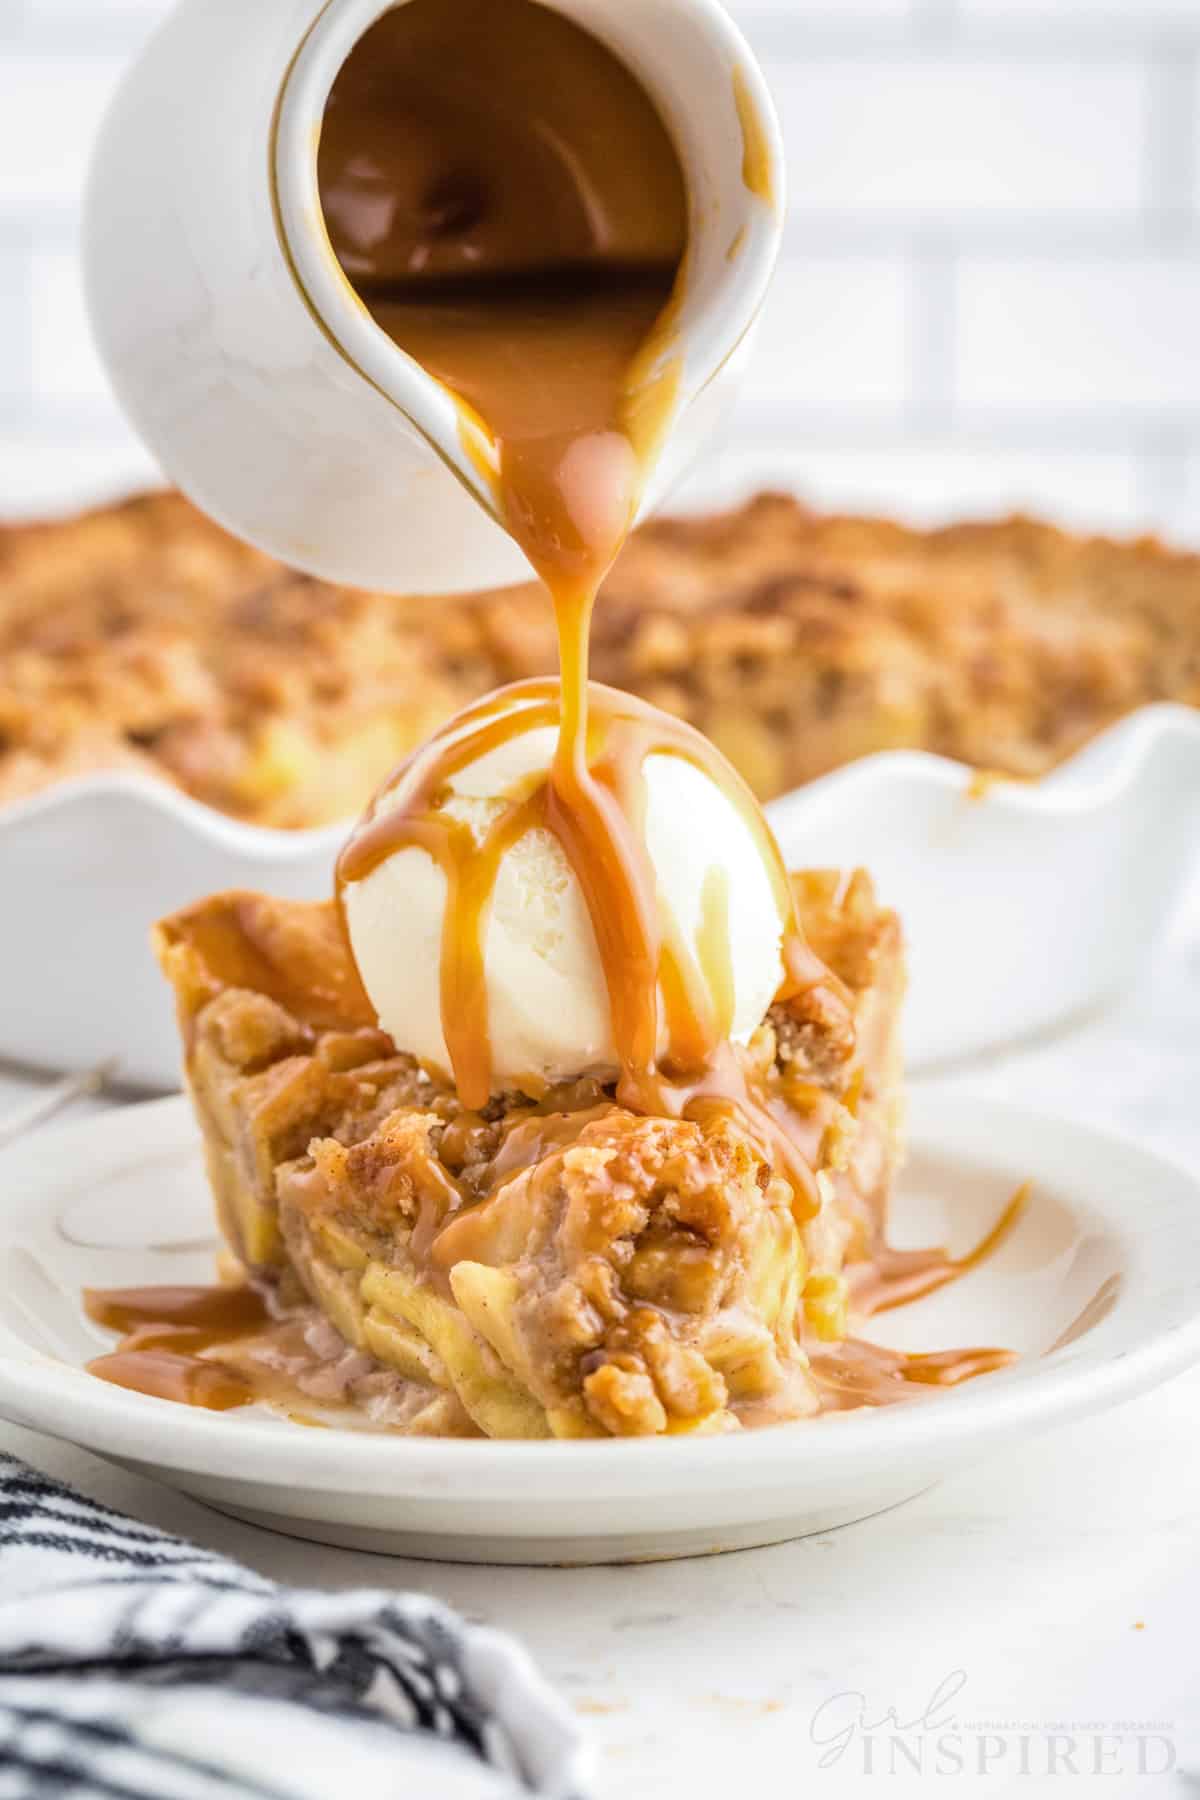 Caramel sauce drizzled over a slice of Dutch caramel apple pie on a white serving plate, Dutch caramel apple pie in a white pie dish, checkered linen, on a white marble countertop with white stacked tiles in the background.